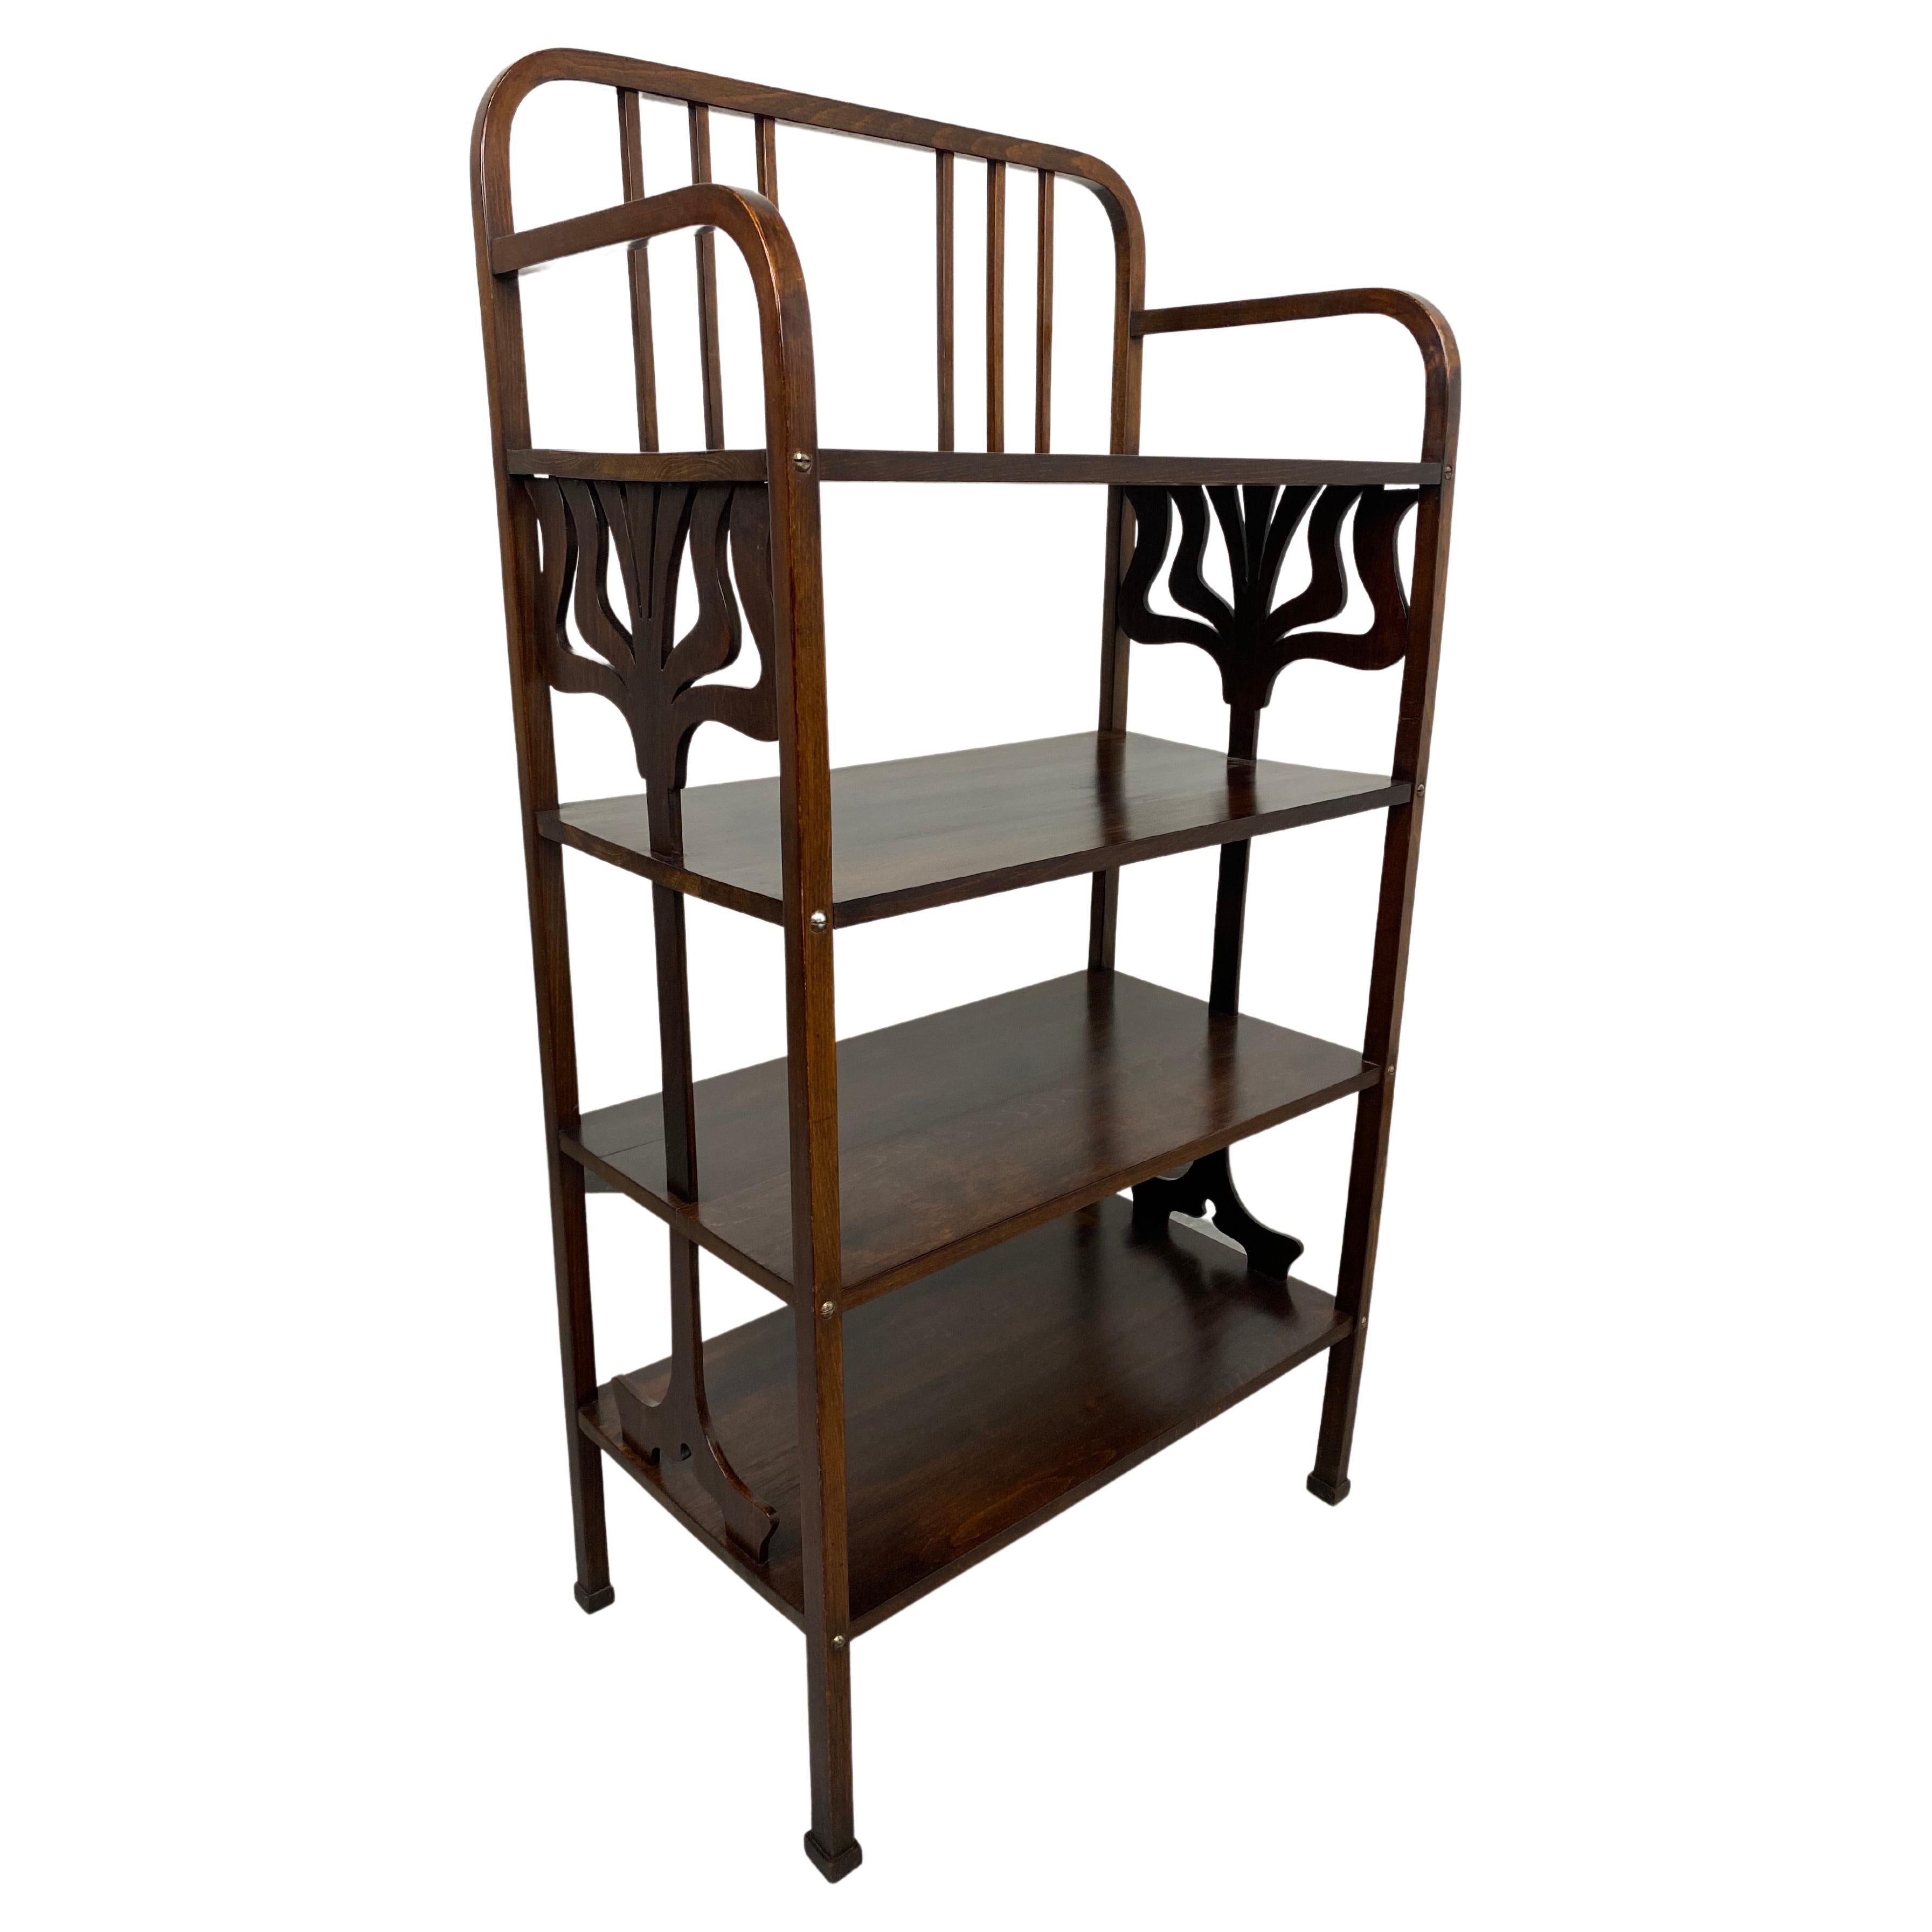 Secession Etagere No.41 by Thonet